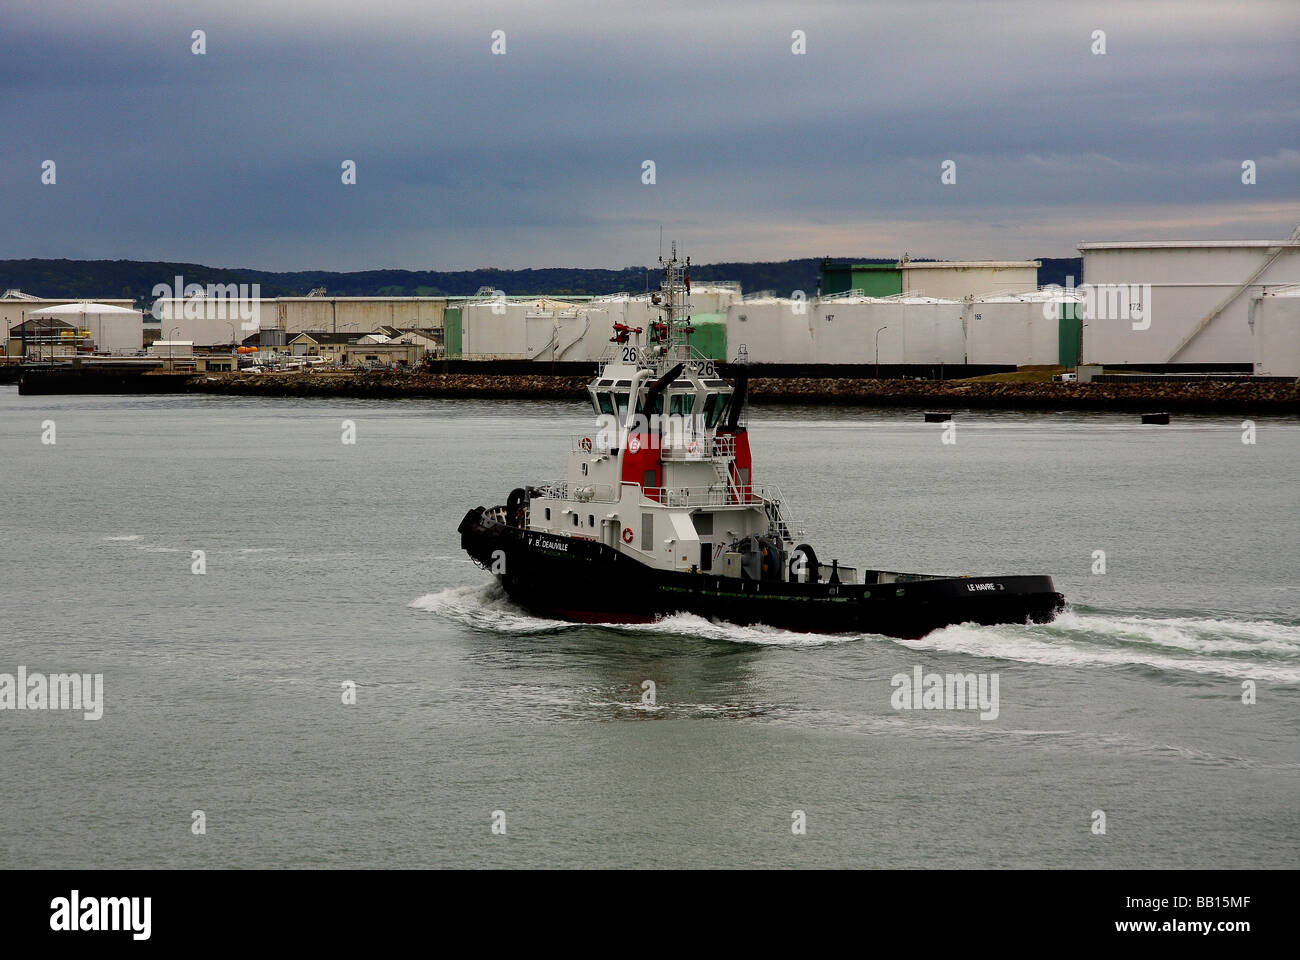 a small tug boat cruising back to Le Havre port under a grey sky containers on the dock side in the background France Stock Photo